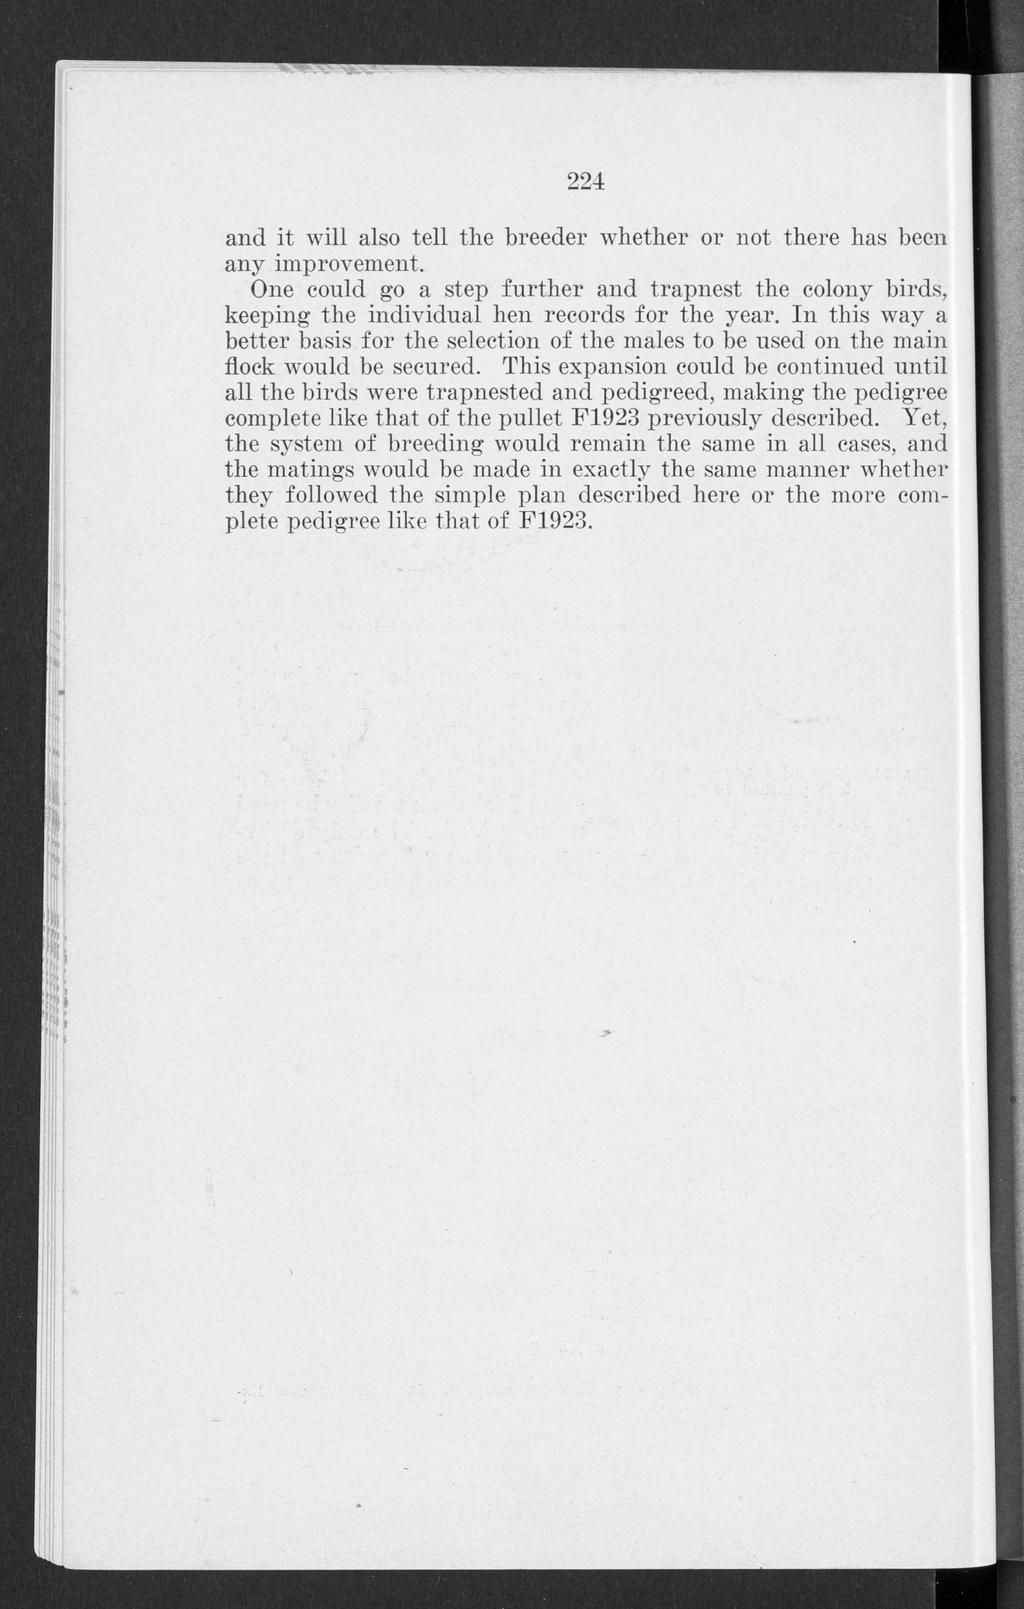 Bulletin, Vol. 22 [1928], No. 258, Art. 1 224 and it will also tell the breeder whether or not there has been any improvement.